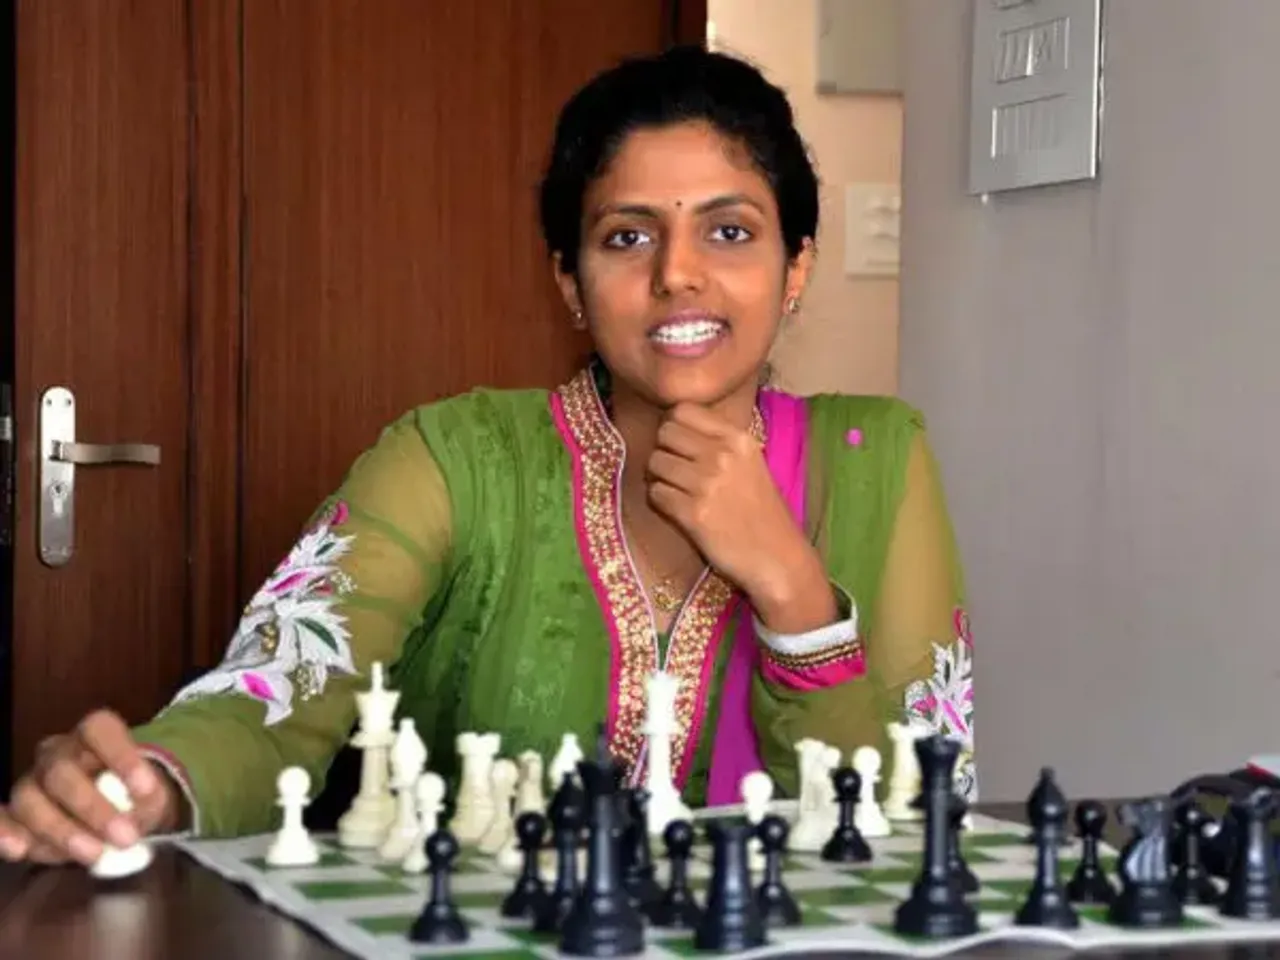 World Women’s Chess Championship: Know The Indian Grandmasters